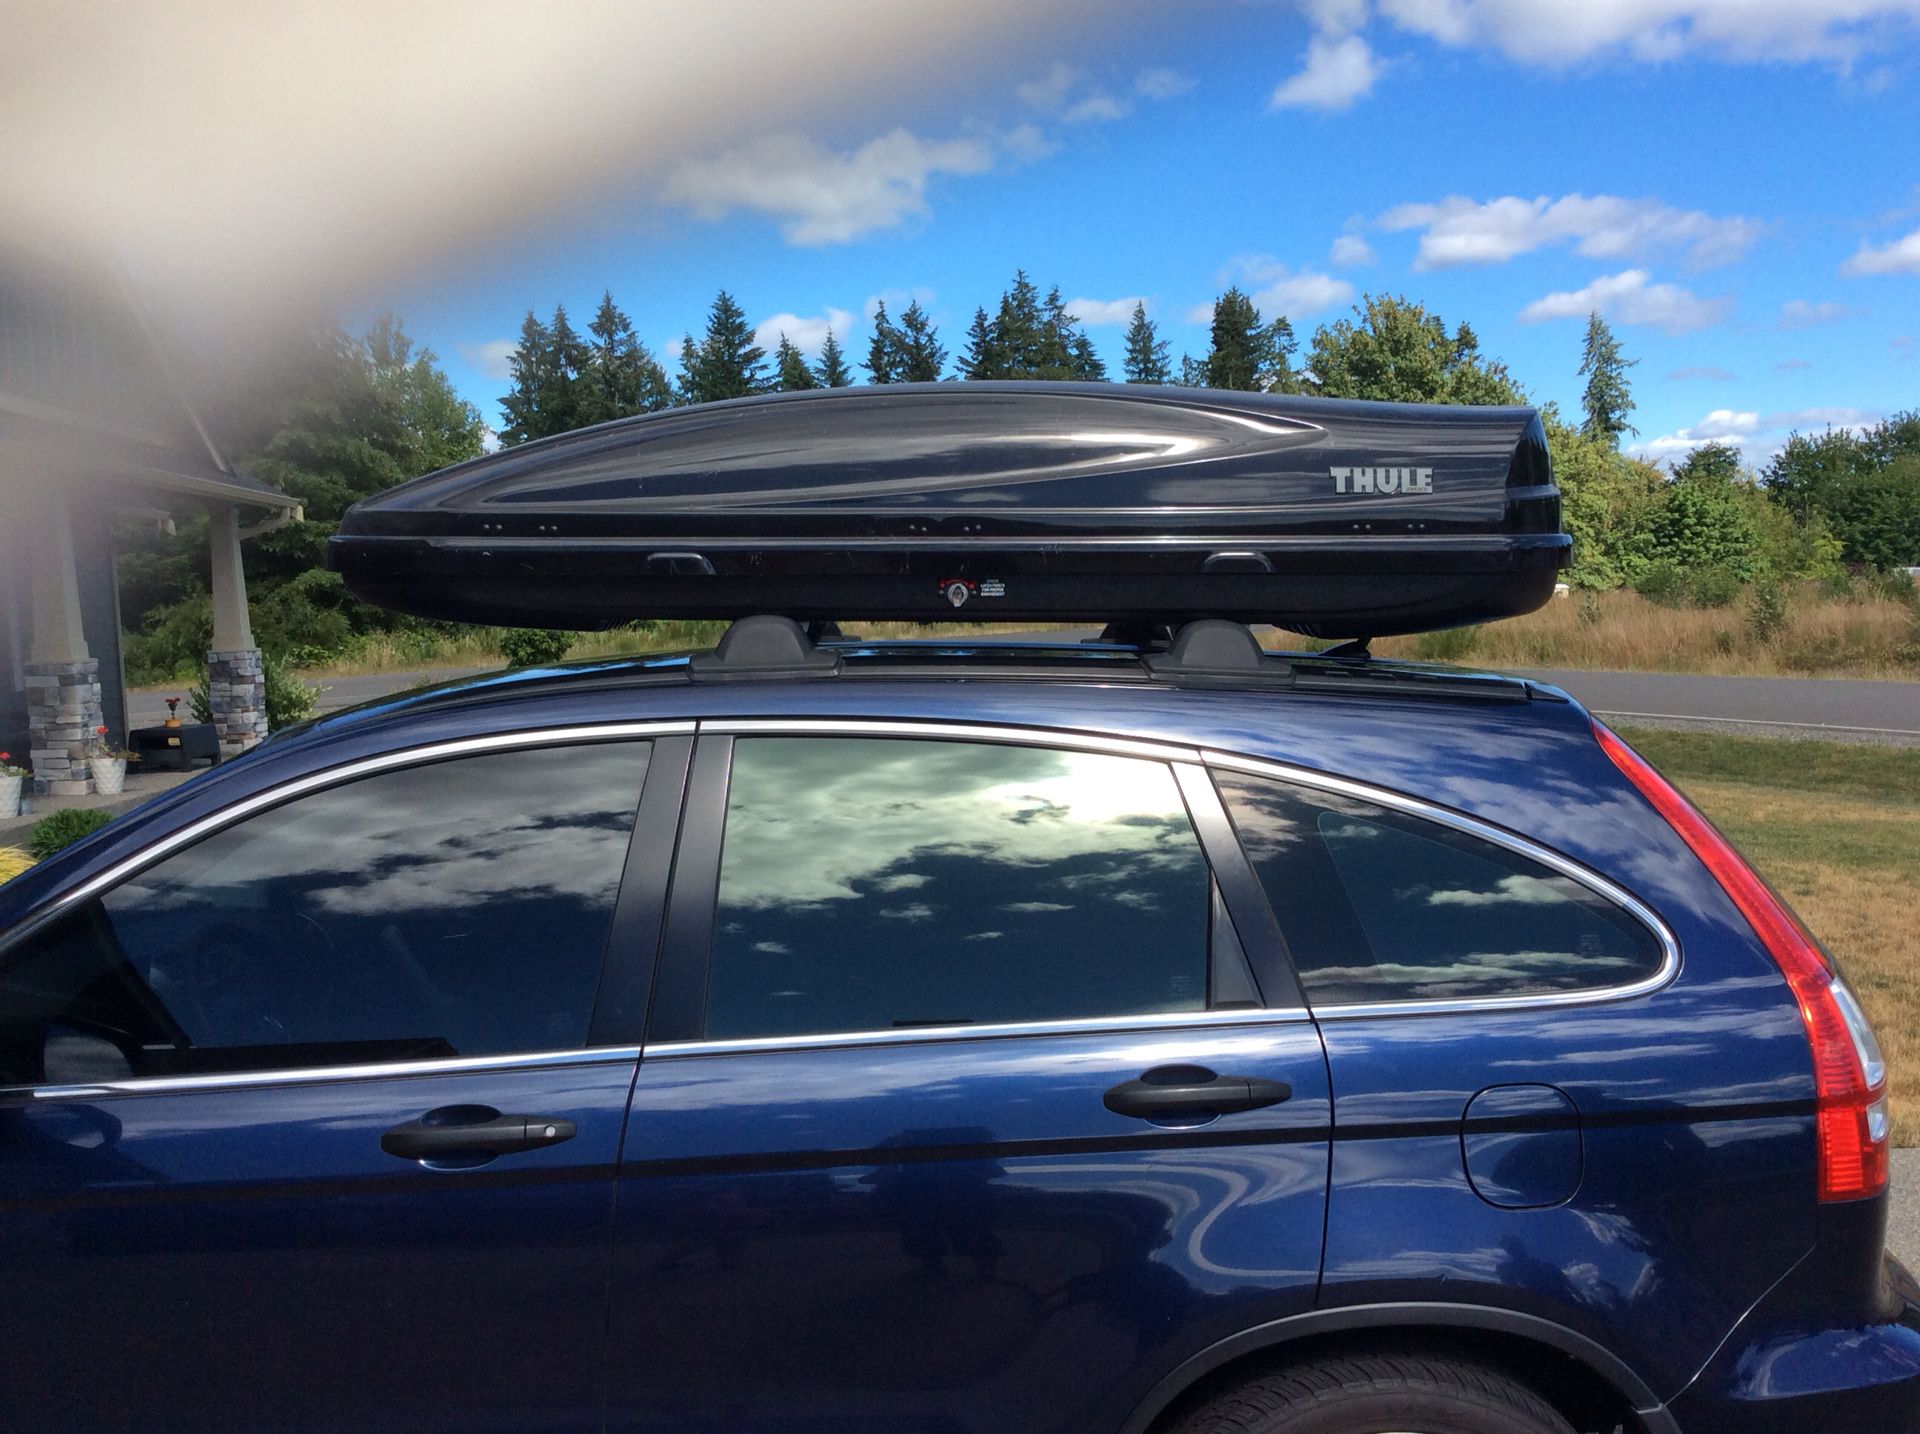 straf venster wijs Thule Atlantis 1600 XT roof top cargo box for Sale in Olympia, WA - OfferUp